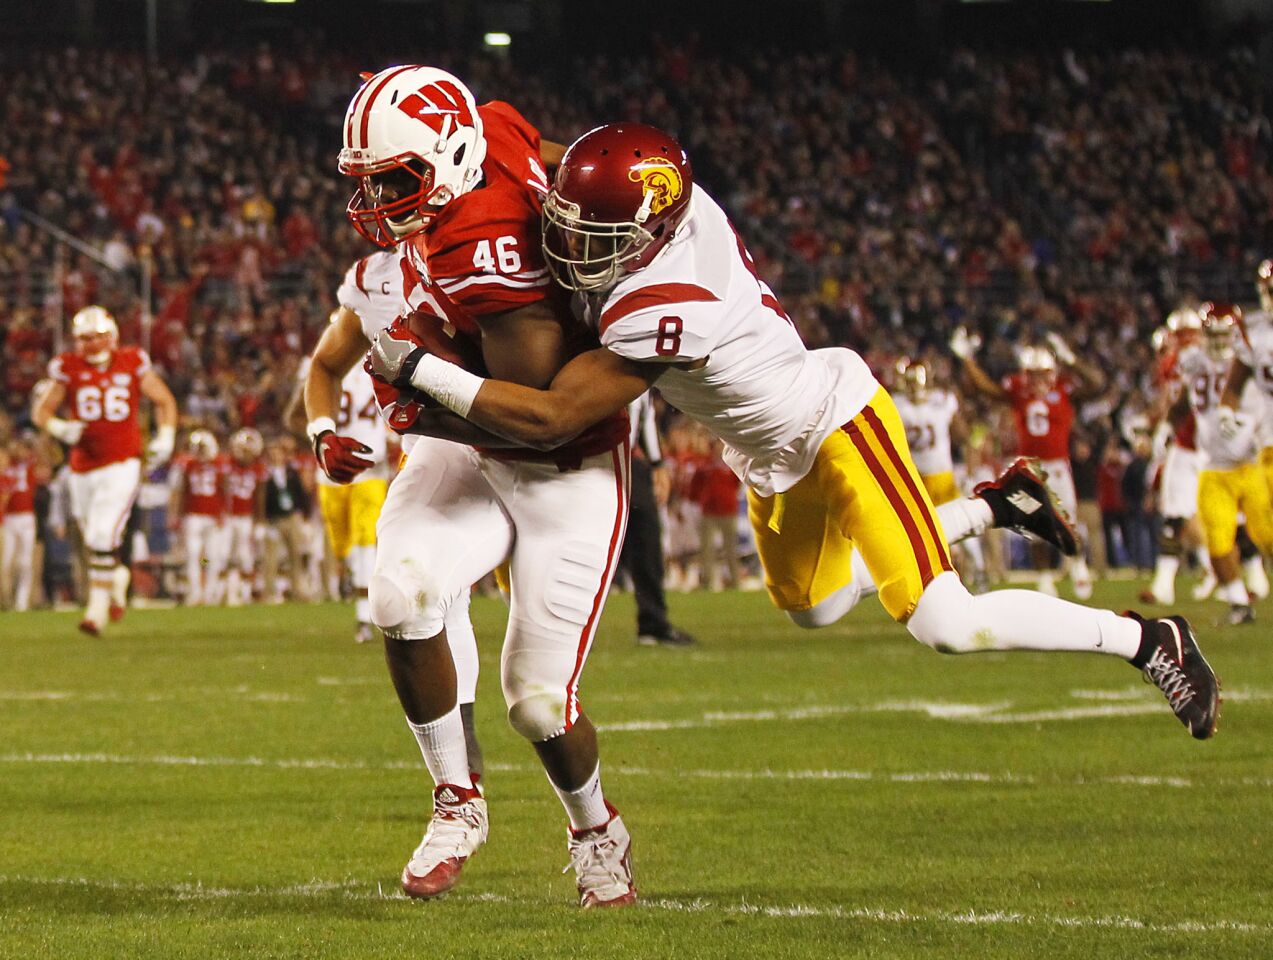 Wisconsin receiver Austin Traylor (46) makes a catch despite the tight coverage by USC defensive back Iman Marshall.